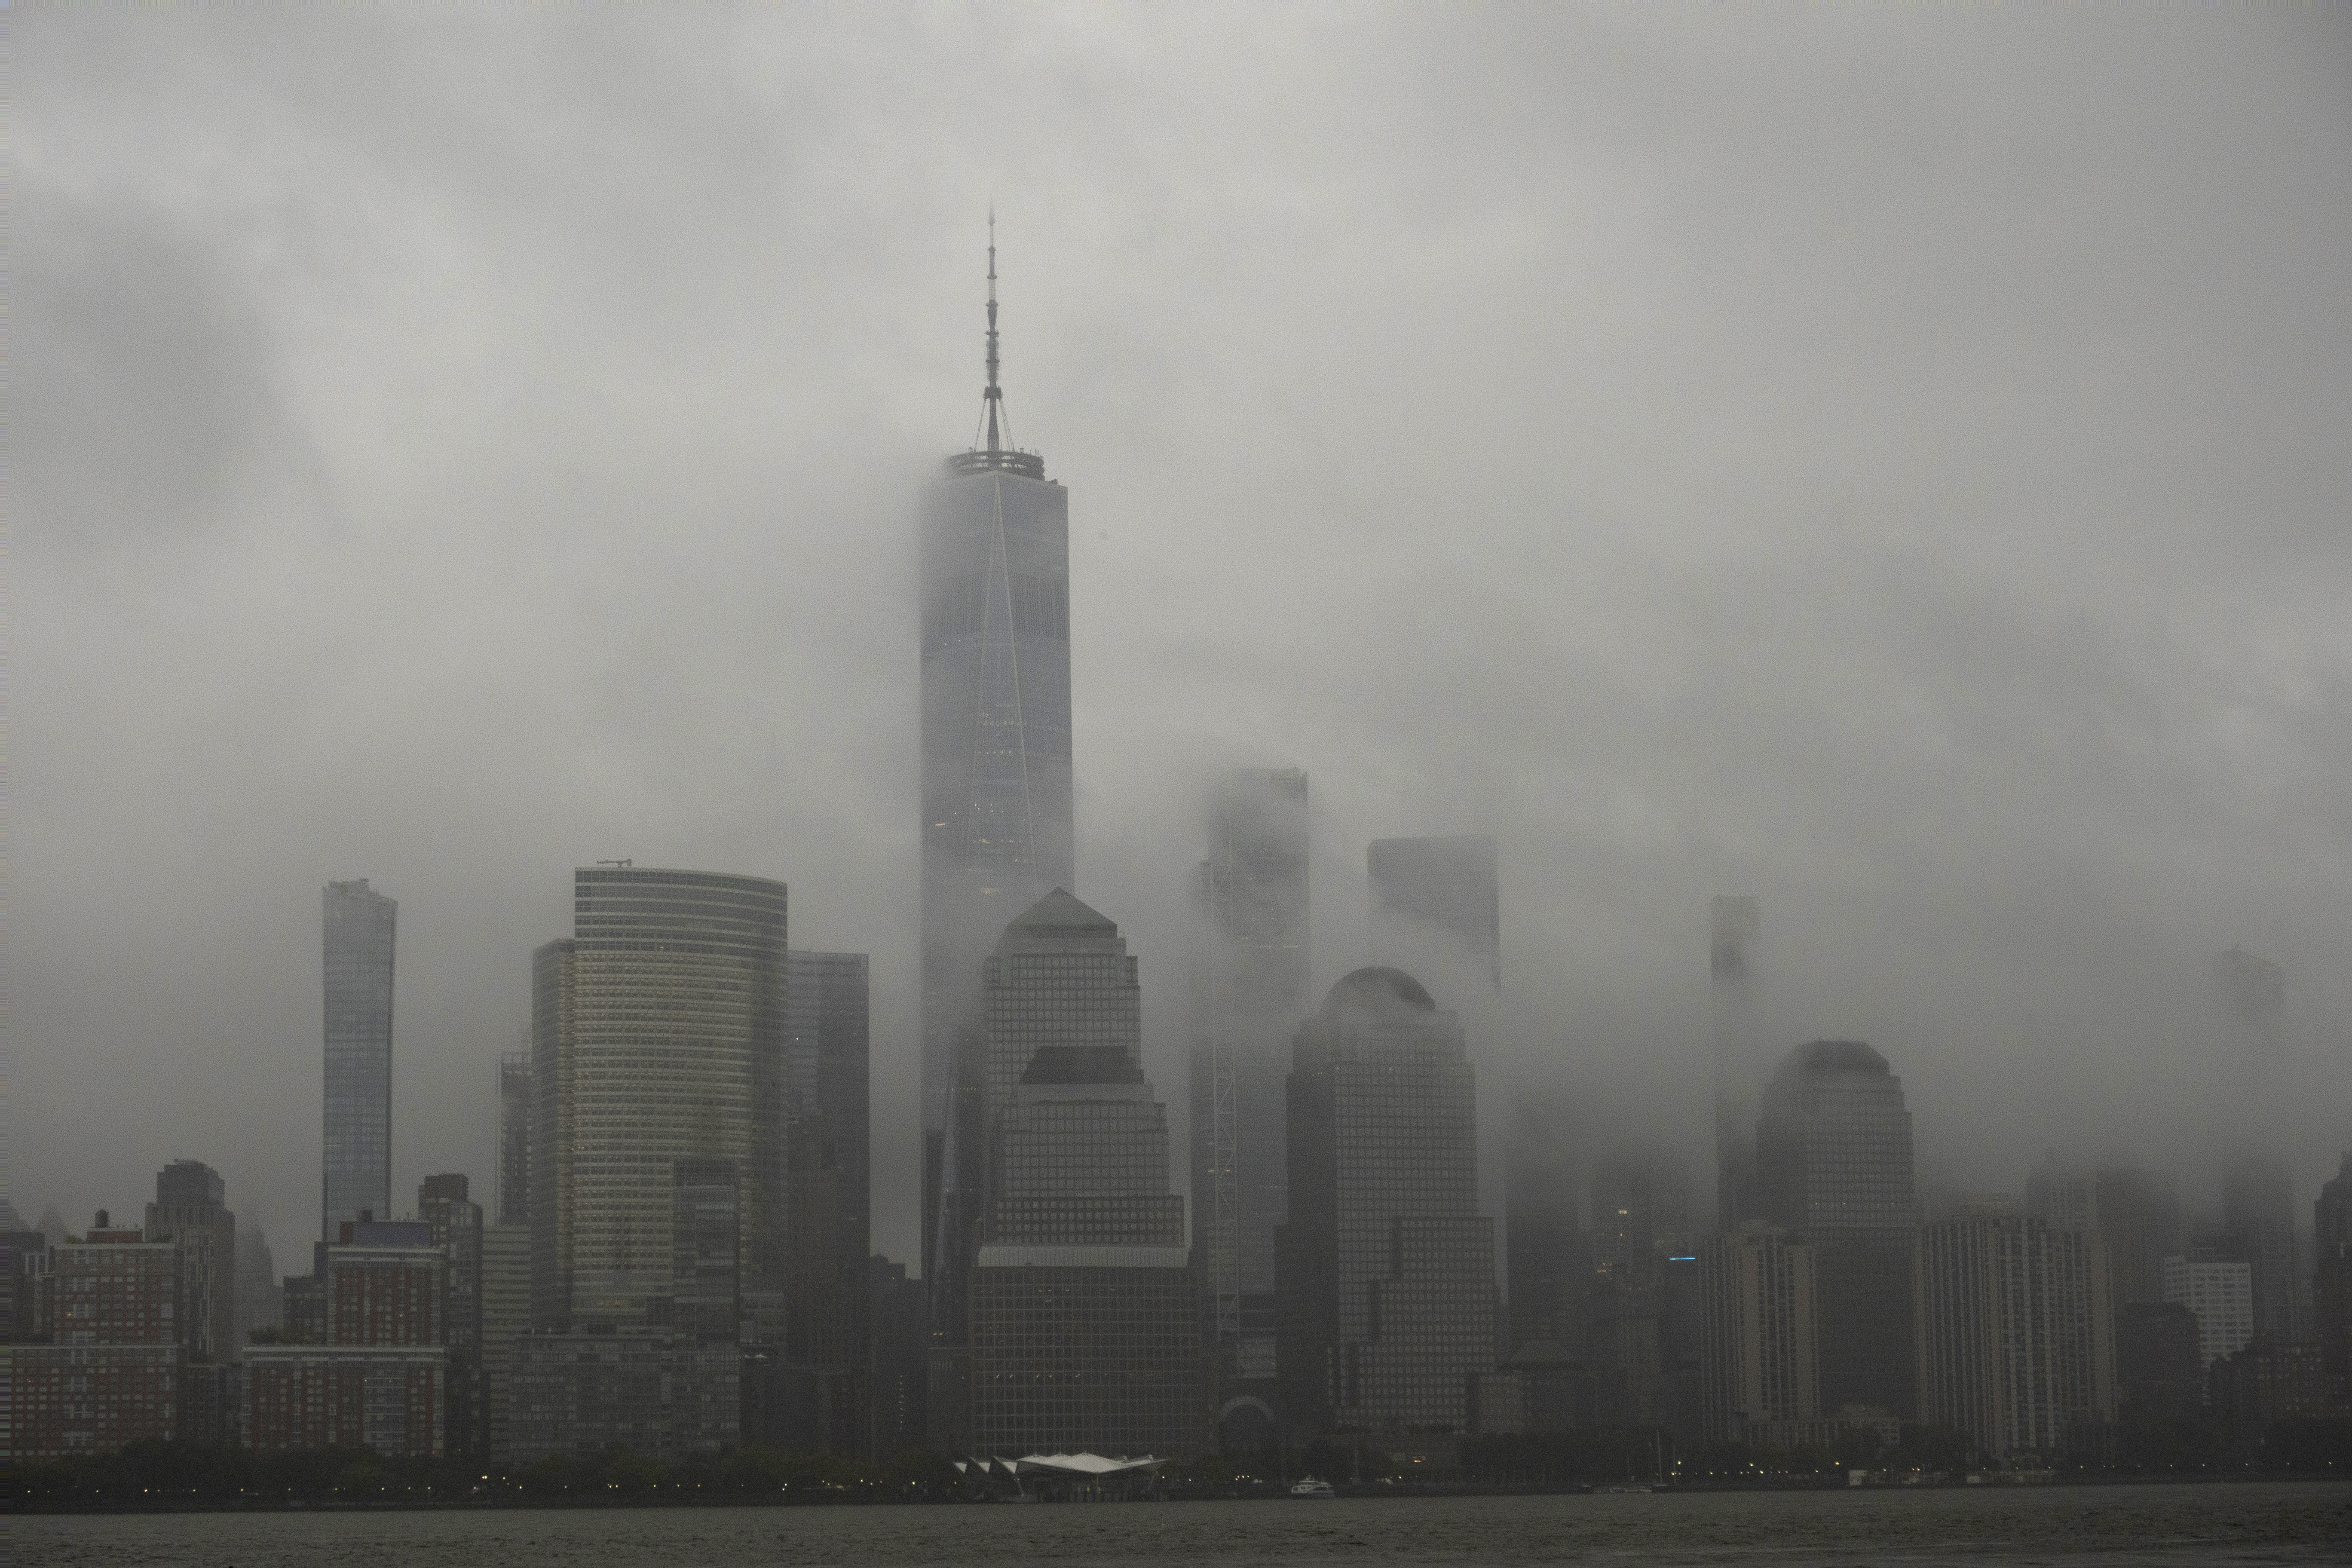 A rainstorm passes across the skyline of lower Manhattan in New York City, as seen from Jersey City, New Jersey.  The skyscrapers are shrouded in gray mist and torrents of rain.